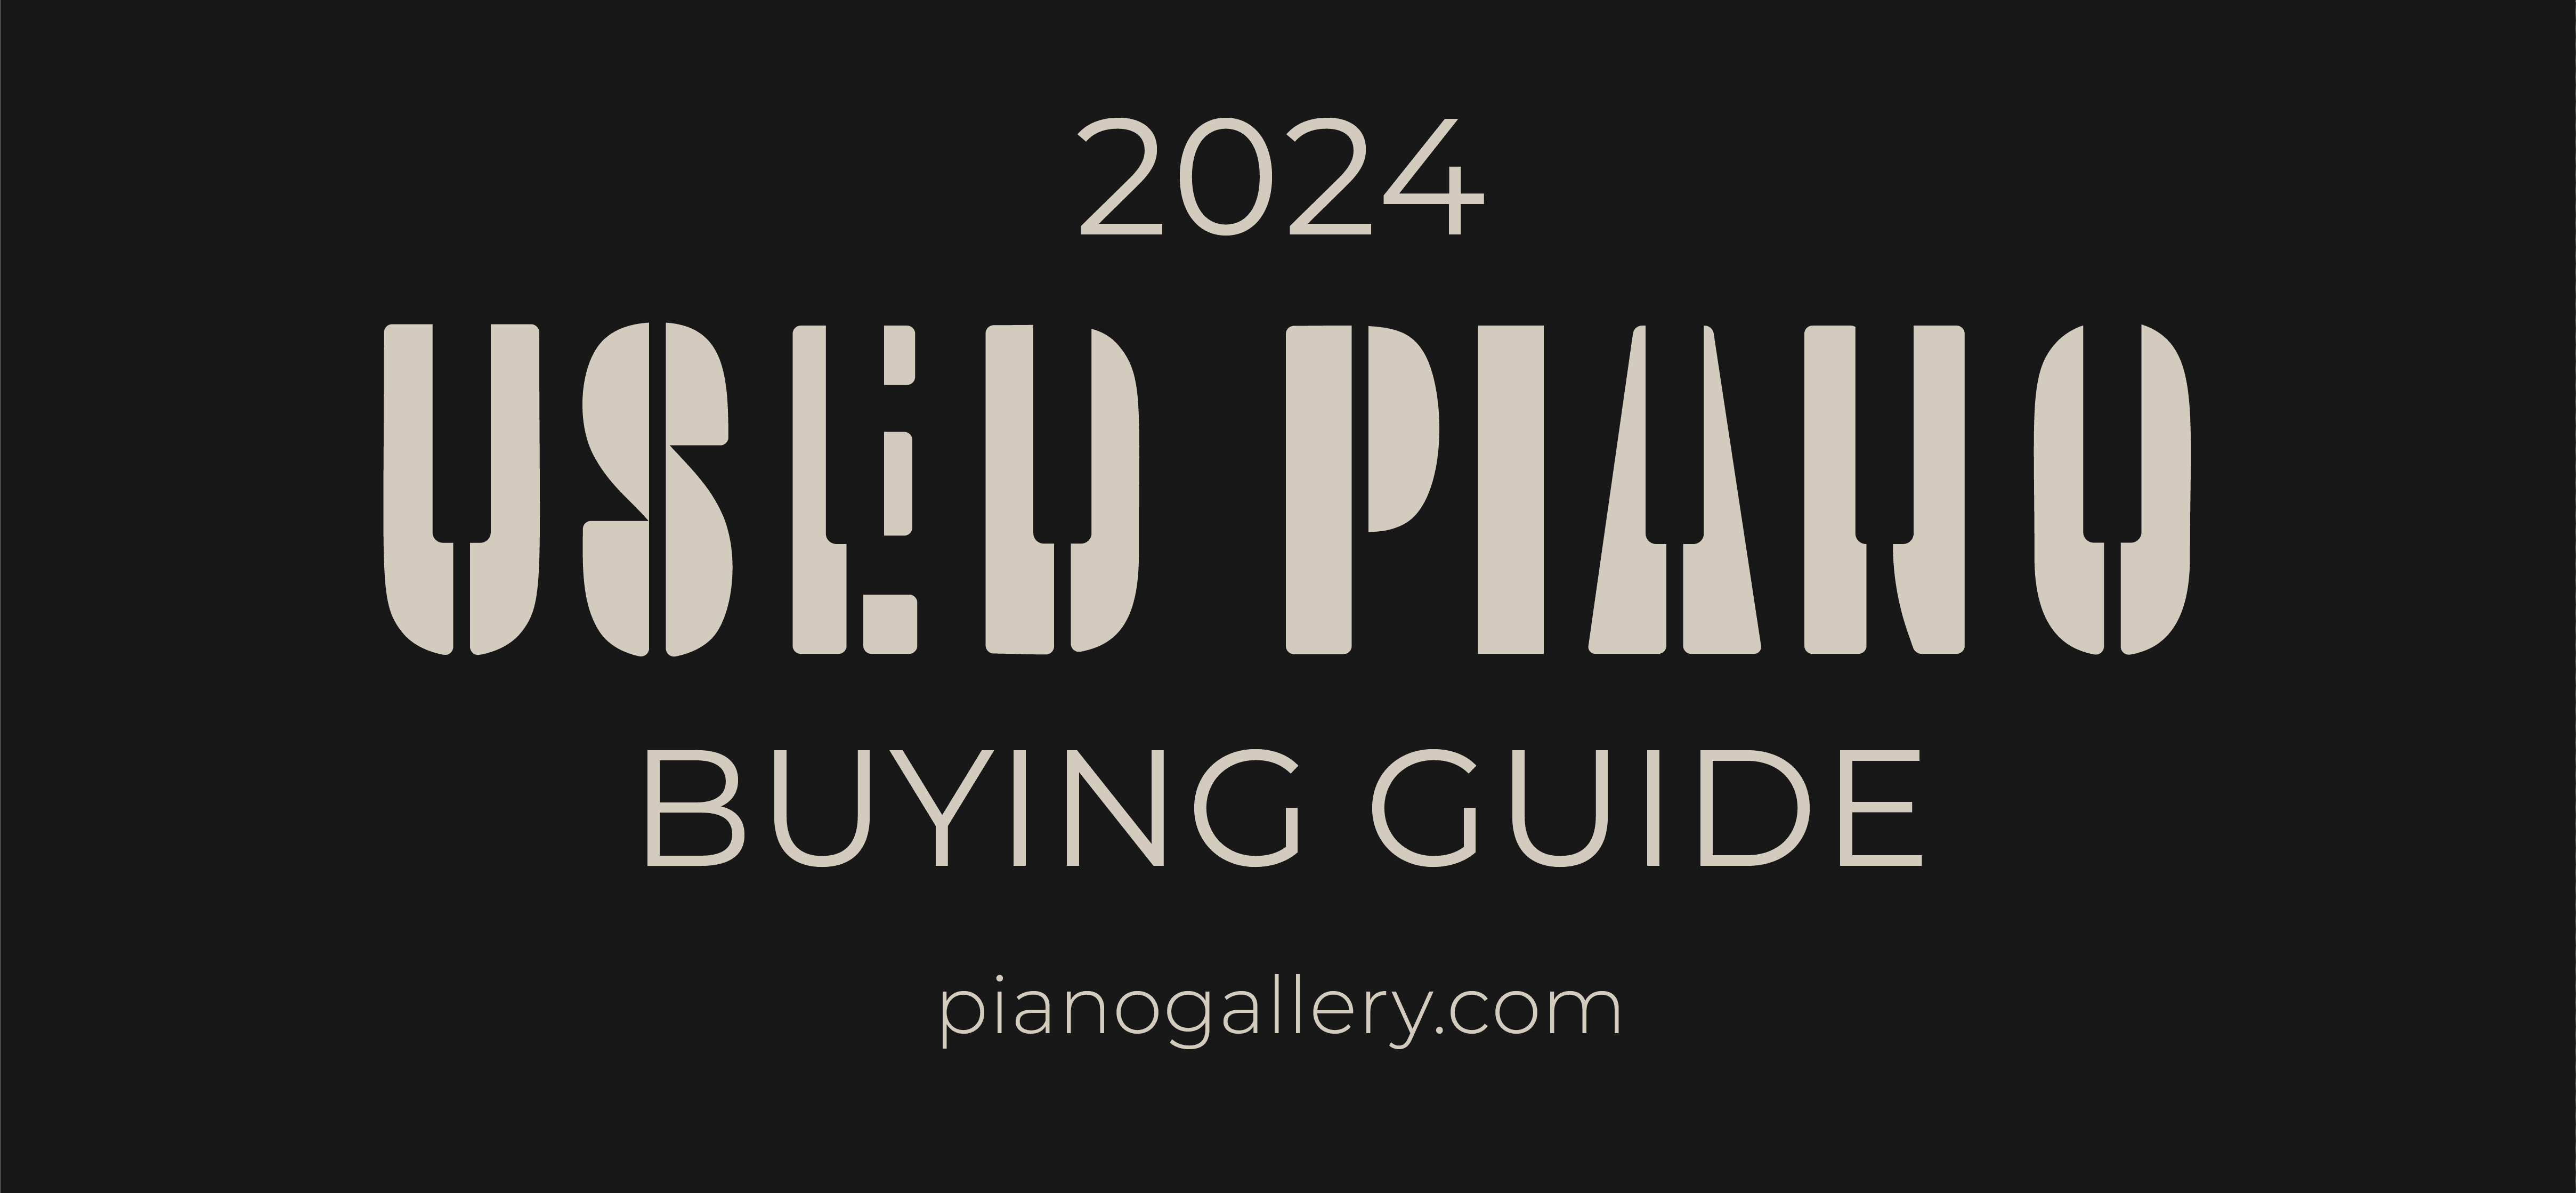 Piano key-shaped font spelling out 2024 used piano buying guide